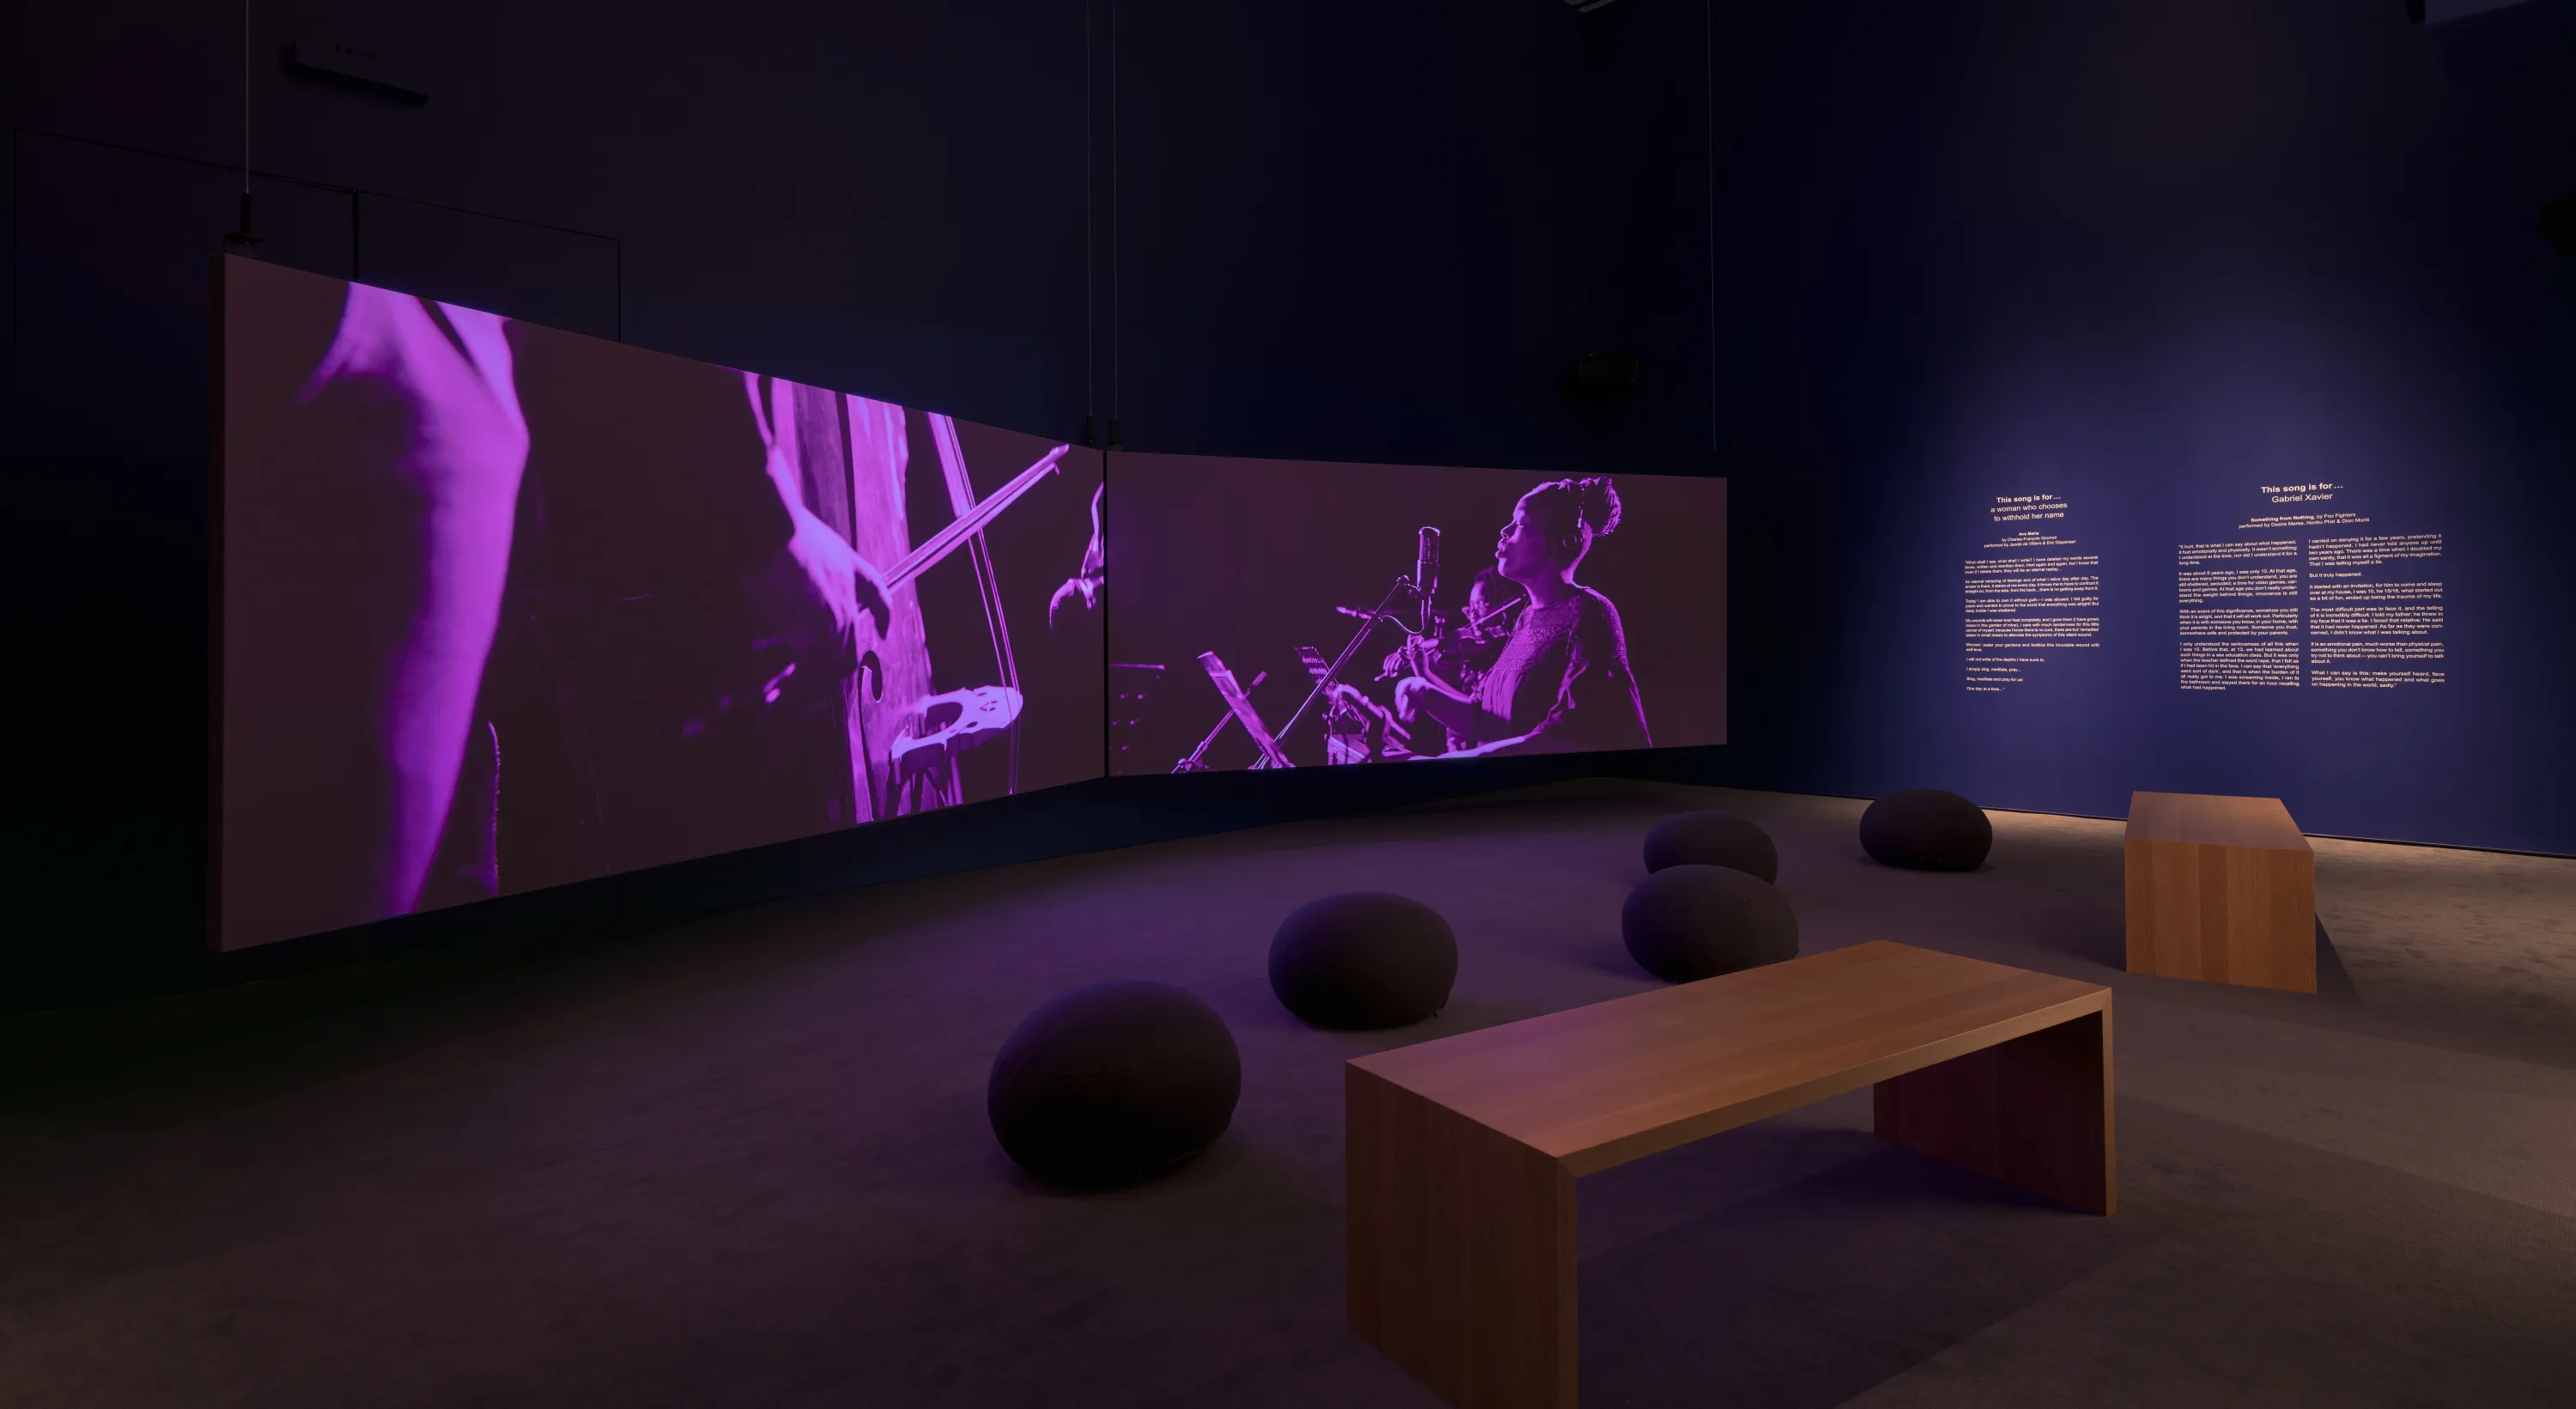 Two rectangular screens in a screening room with dark purple walls and gray carpeted floor. On the walls is text relating to the artwork installation. There is a seating arrangement on the floor of two wooden benches and several cushion pods.